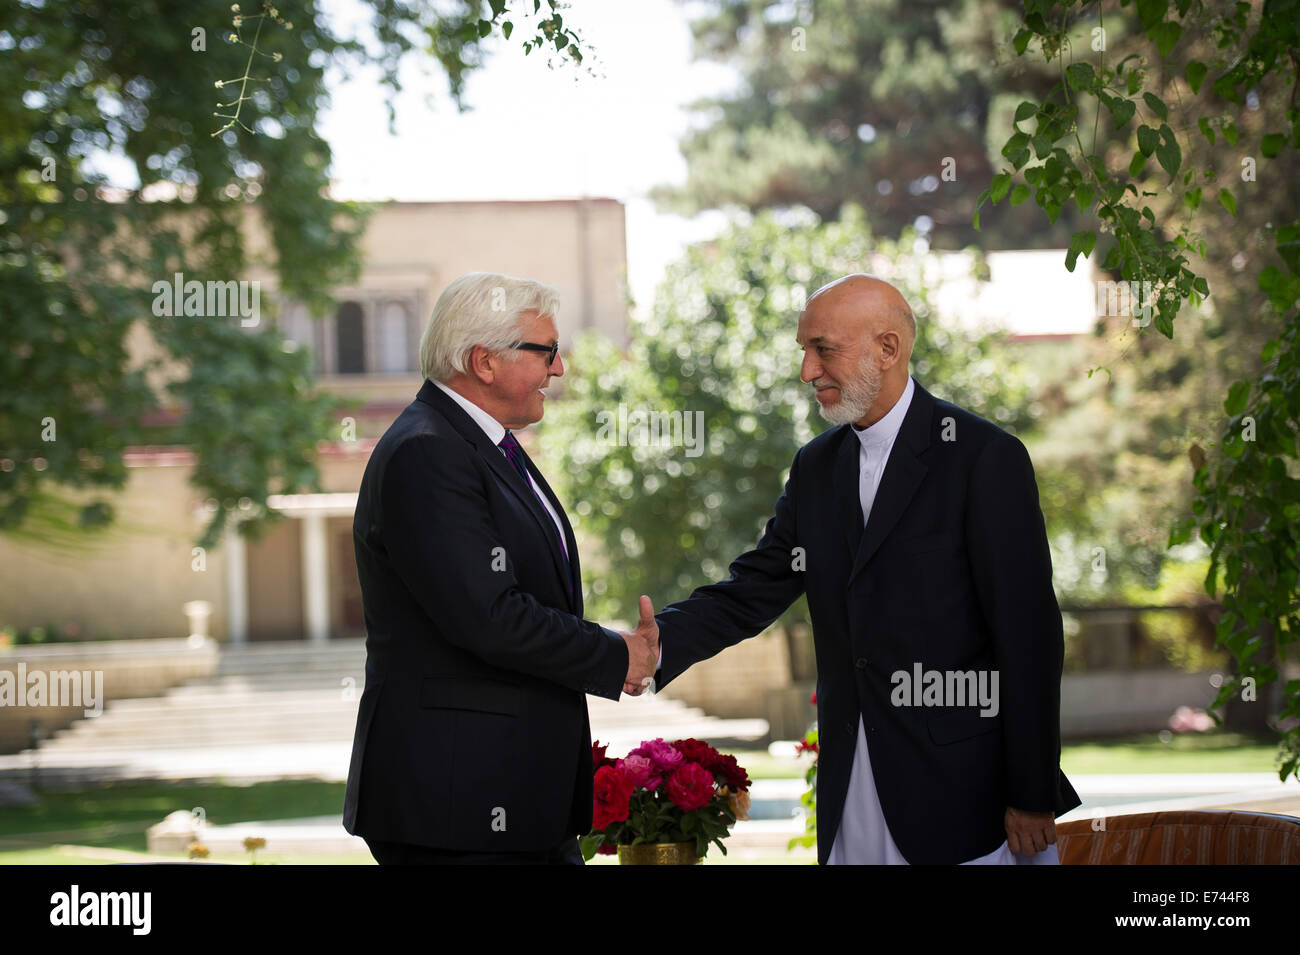 Kabul, Afghanistan. 6th Sep, 2014. German Foreign Minister Frank-Walter Steinmeier (SPD, L) talks to Afghan President Hamid Karsai at the presidential palace in Kabul, Afghanistan, 6 September 2014. Steinmeier is on a one-day visit to Afghanistan. Photo: Maja Hitij/dpa/Alamy Live News Stock Photo